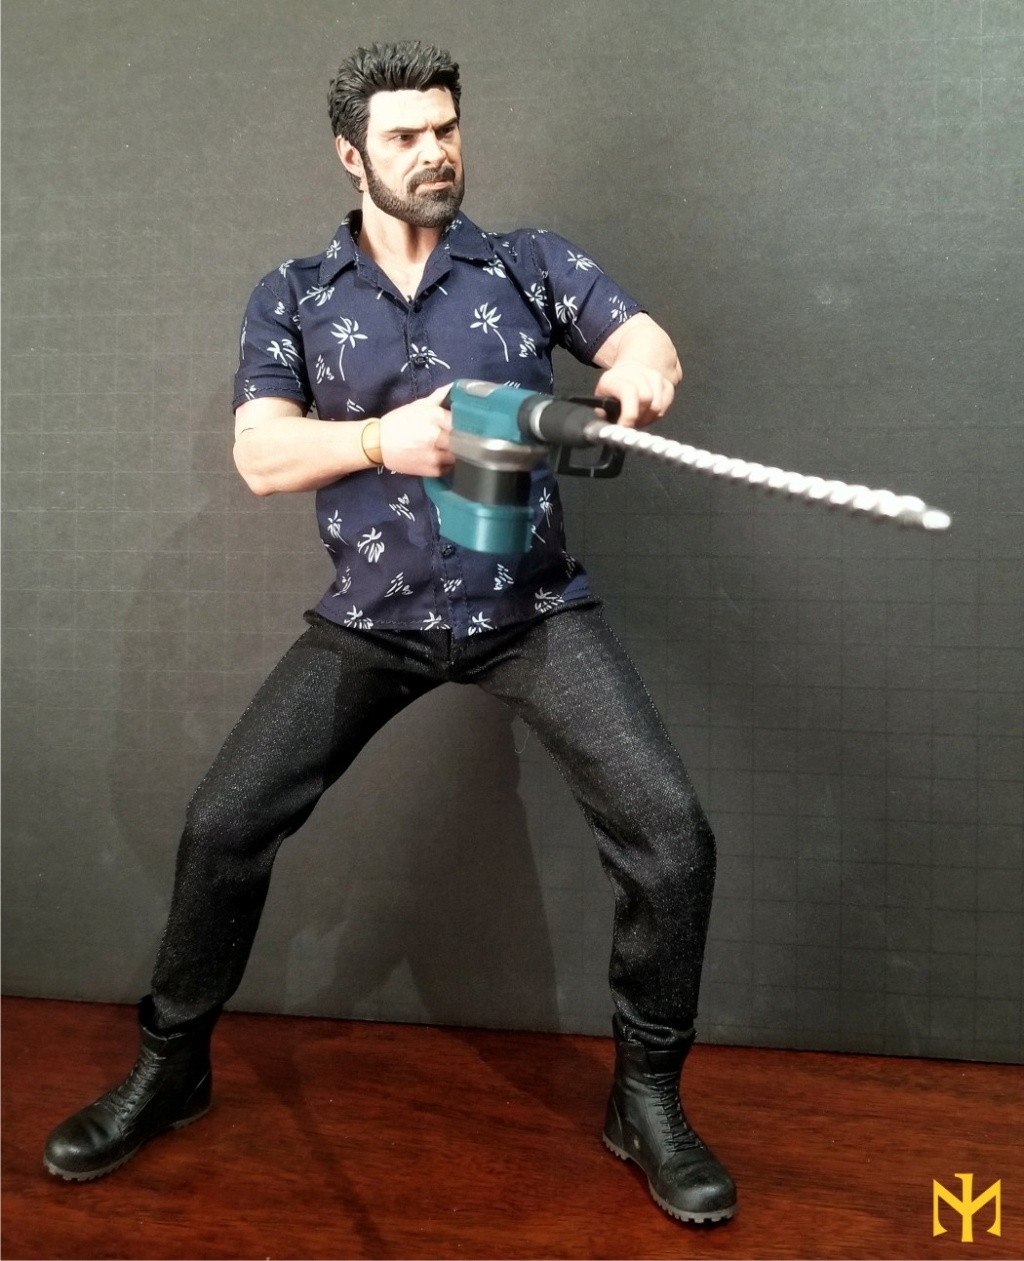 amazon - Soo Soo Toys SST 025 Mr Butcher (Billy Butcher from The Boys) Review Sstmb010